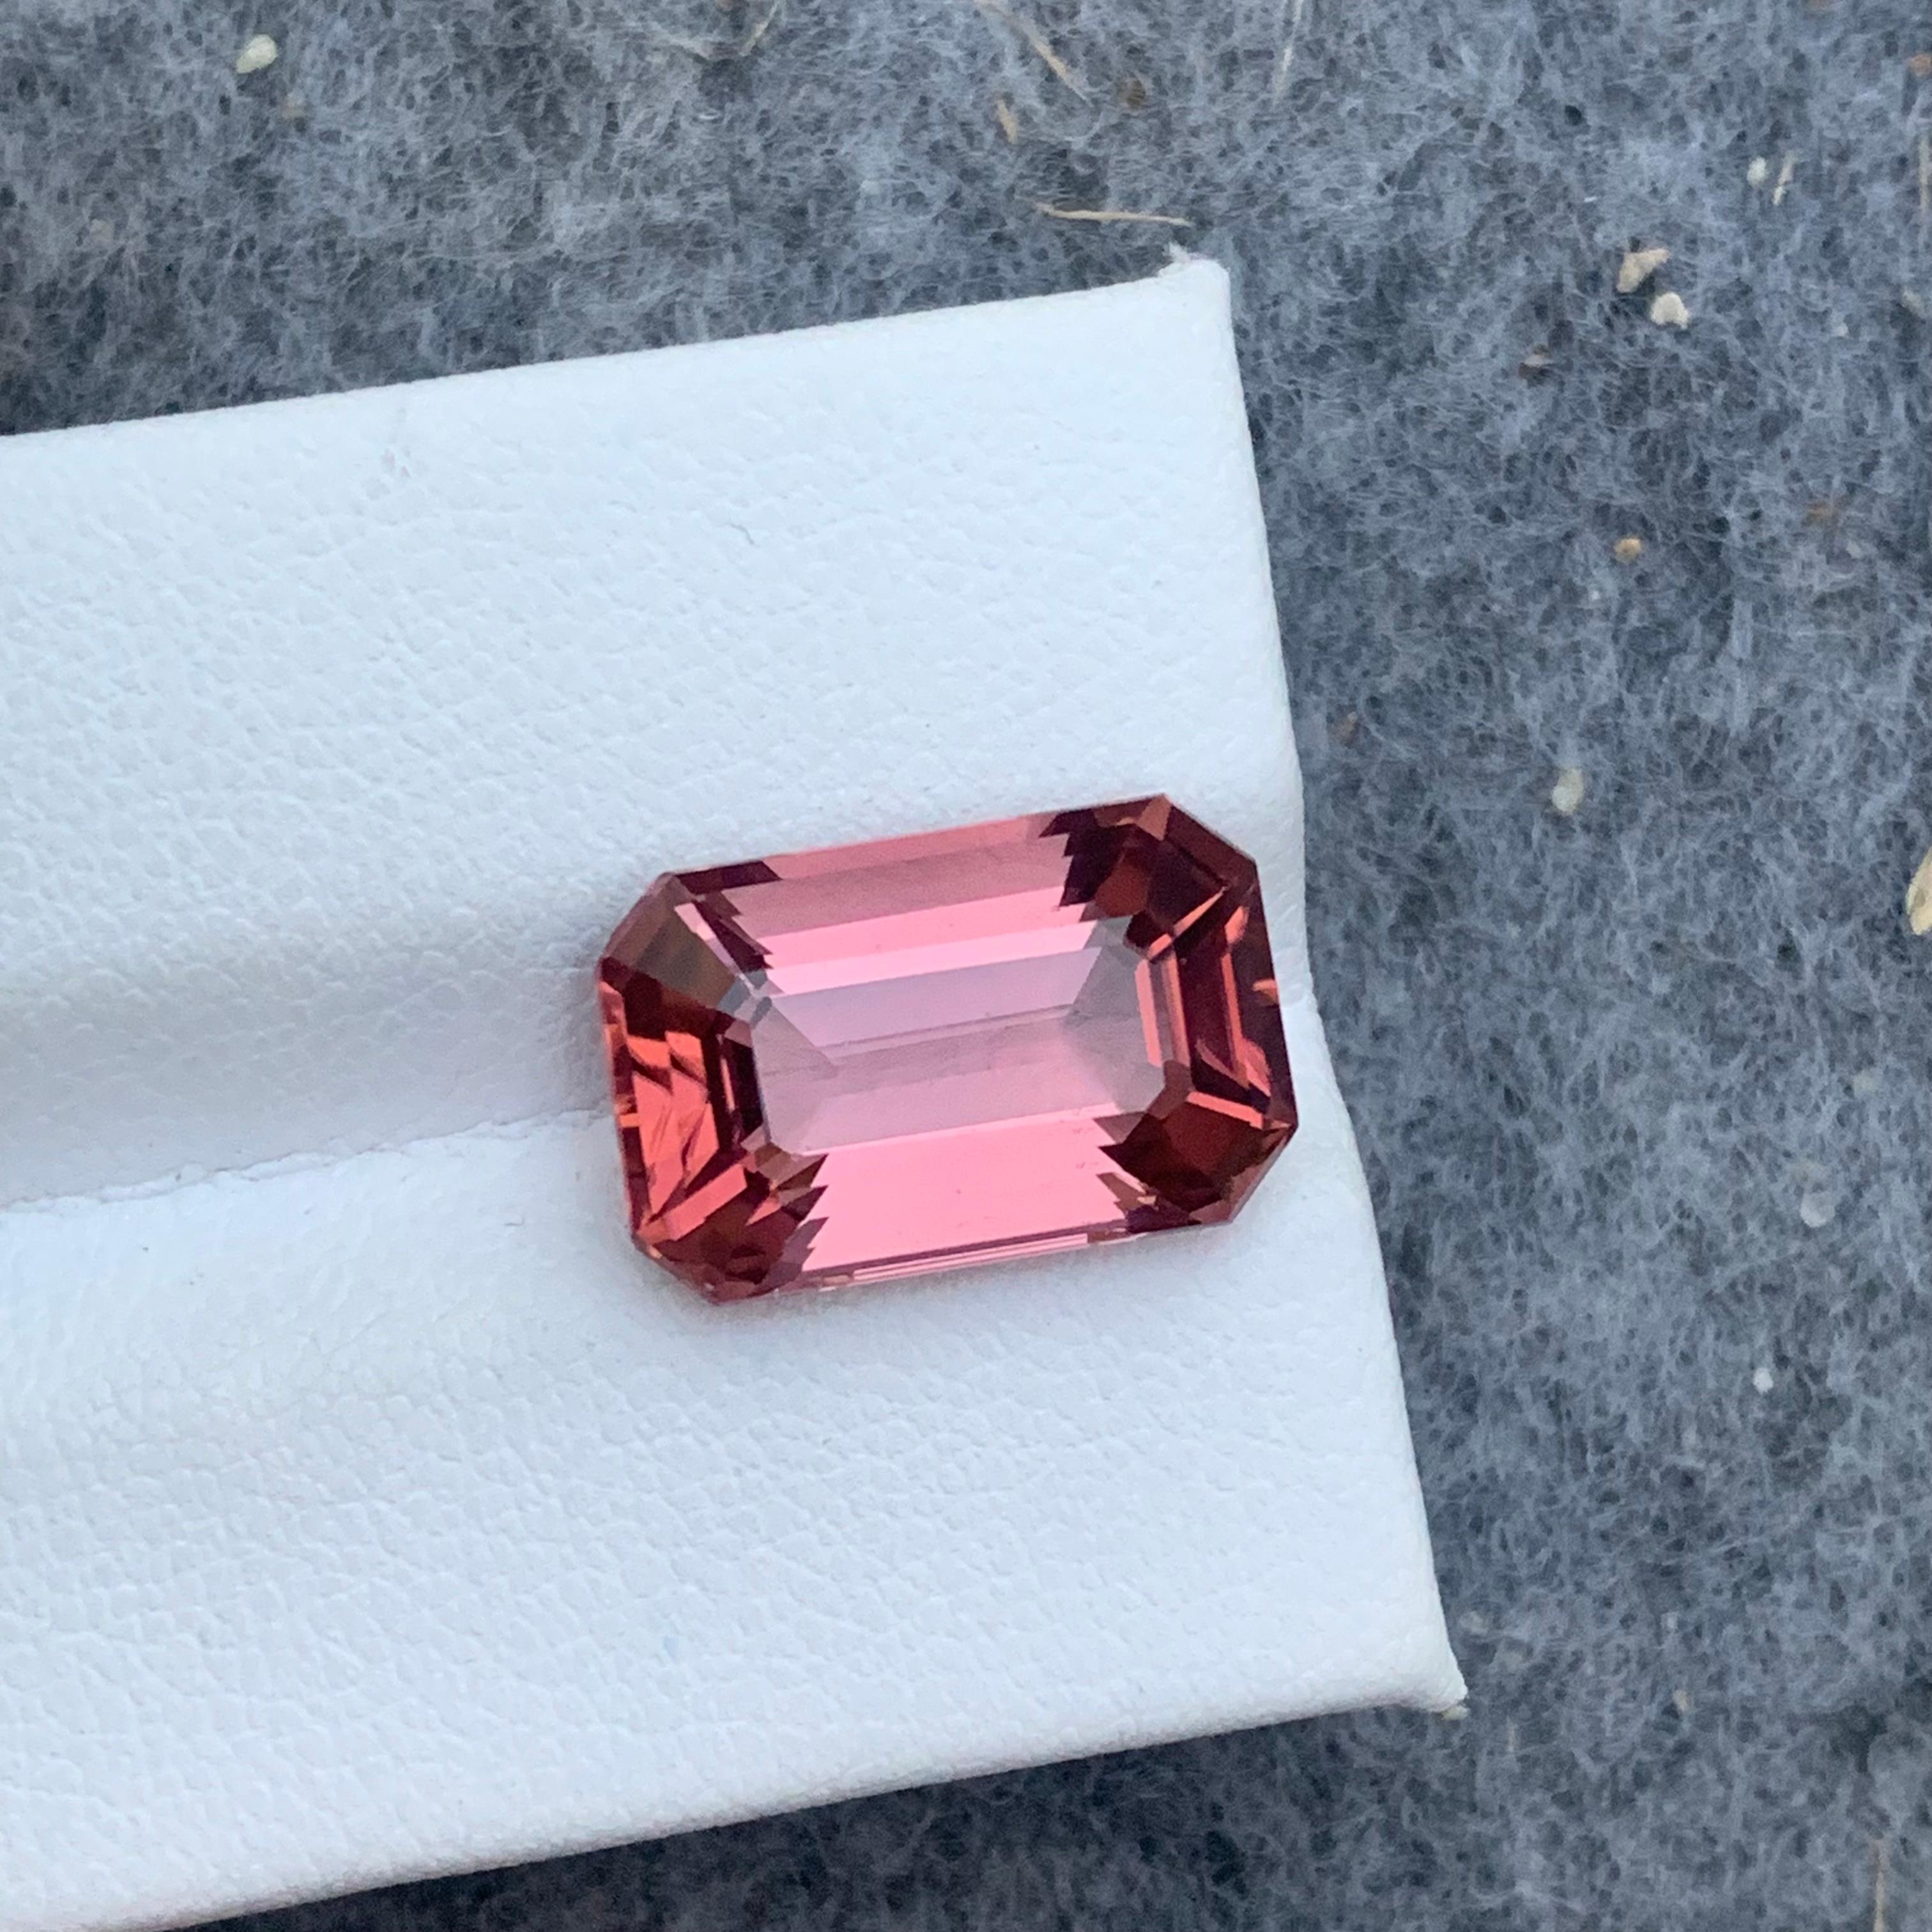 9.0 Carat AAA Quality Loose Soft Pink Tourmaline Emerald Cut From Afghanistan 13